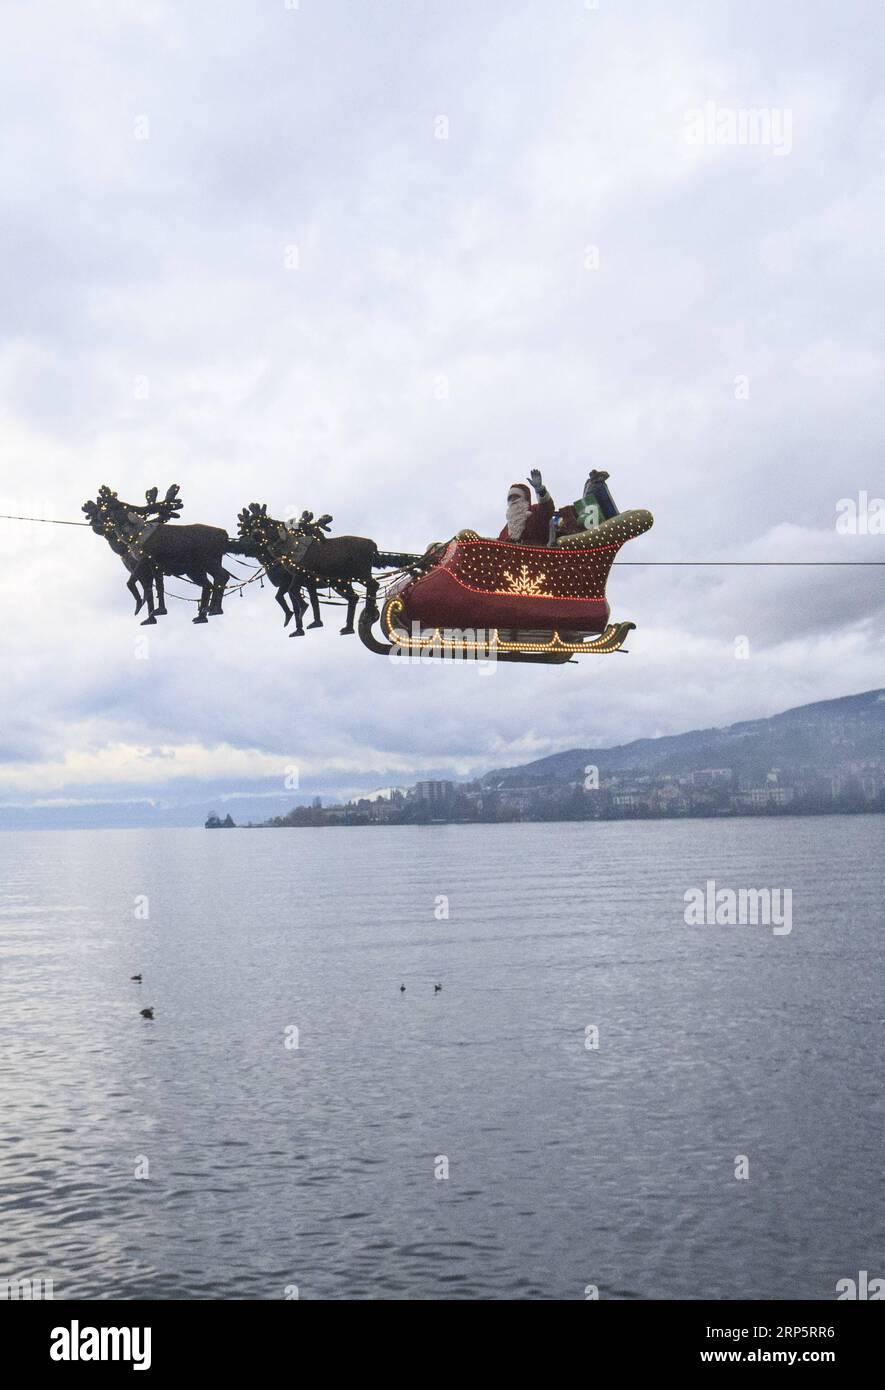 (181222) -- MONTREUX (SWITZERLAND), Dec. 22, 2018 -- A Santa Claus waves to the crowd from his flying sleigh drawn by reindeers over Lake Leman at sunset in Montreux, Switzerland, on Dec. 22, 2018. The flying Santa Claus stunt show is part of promotional activities by the Christmas market in Montreux, which is one of the most famous and biggest markets of its kind in Switzerland. ) SWITZERLAND-MONTREUX-SANTA CLAUS-FLYING SLEIGH XuxJinquan PUBLICATIONxNOTxINxCHN Stock Photo